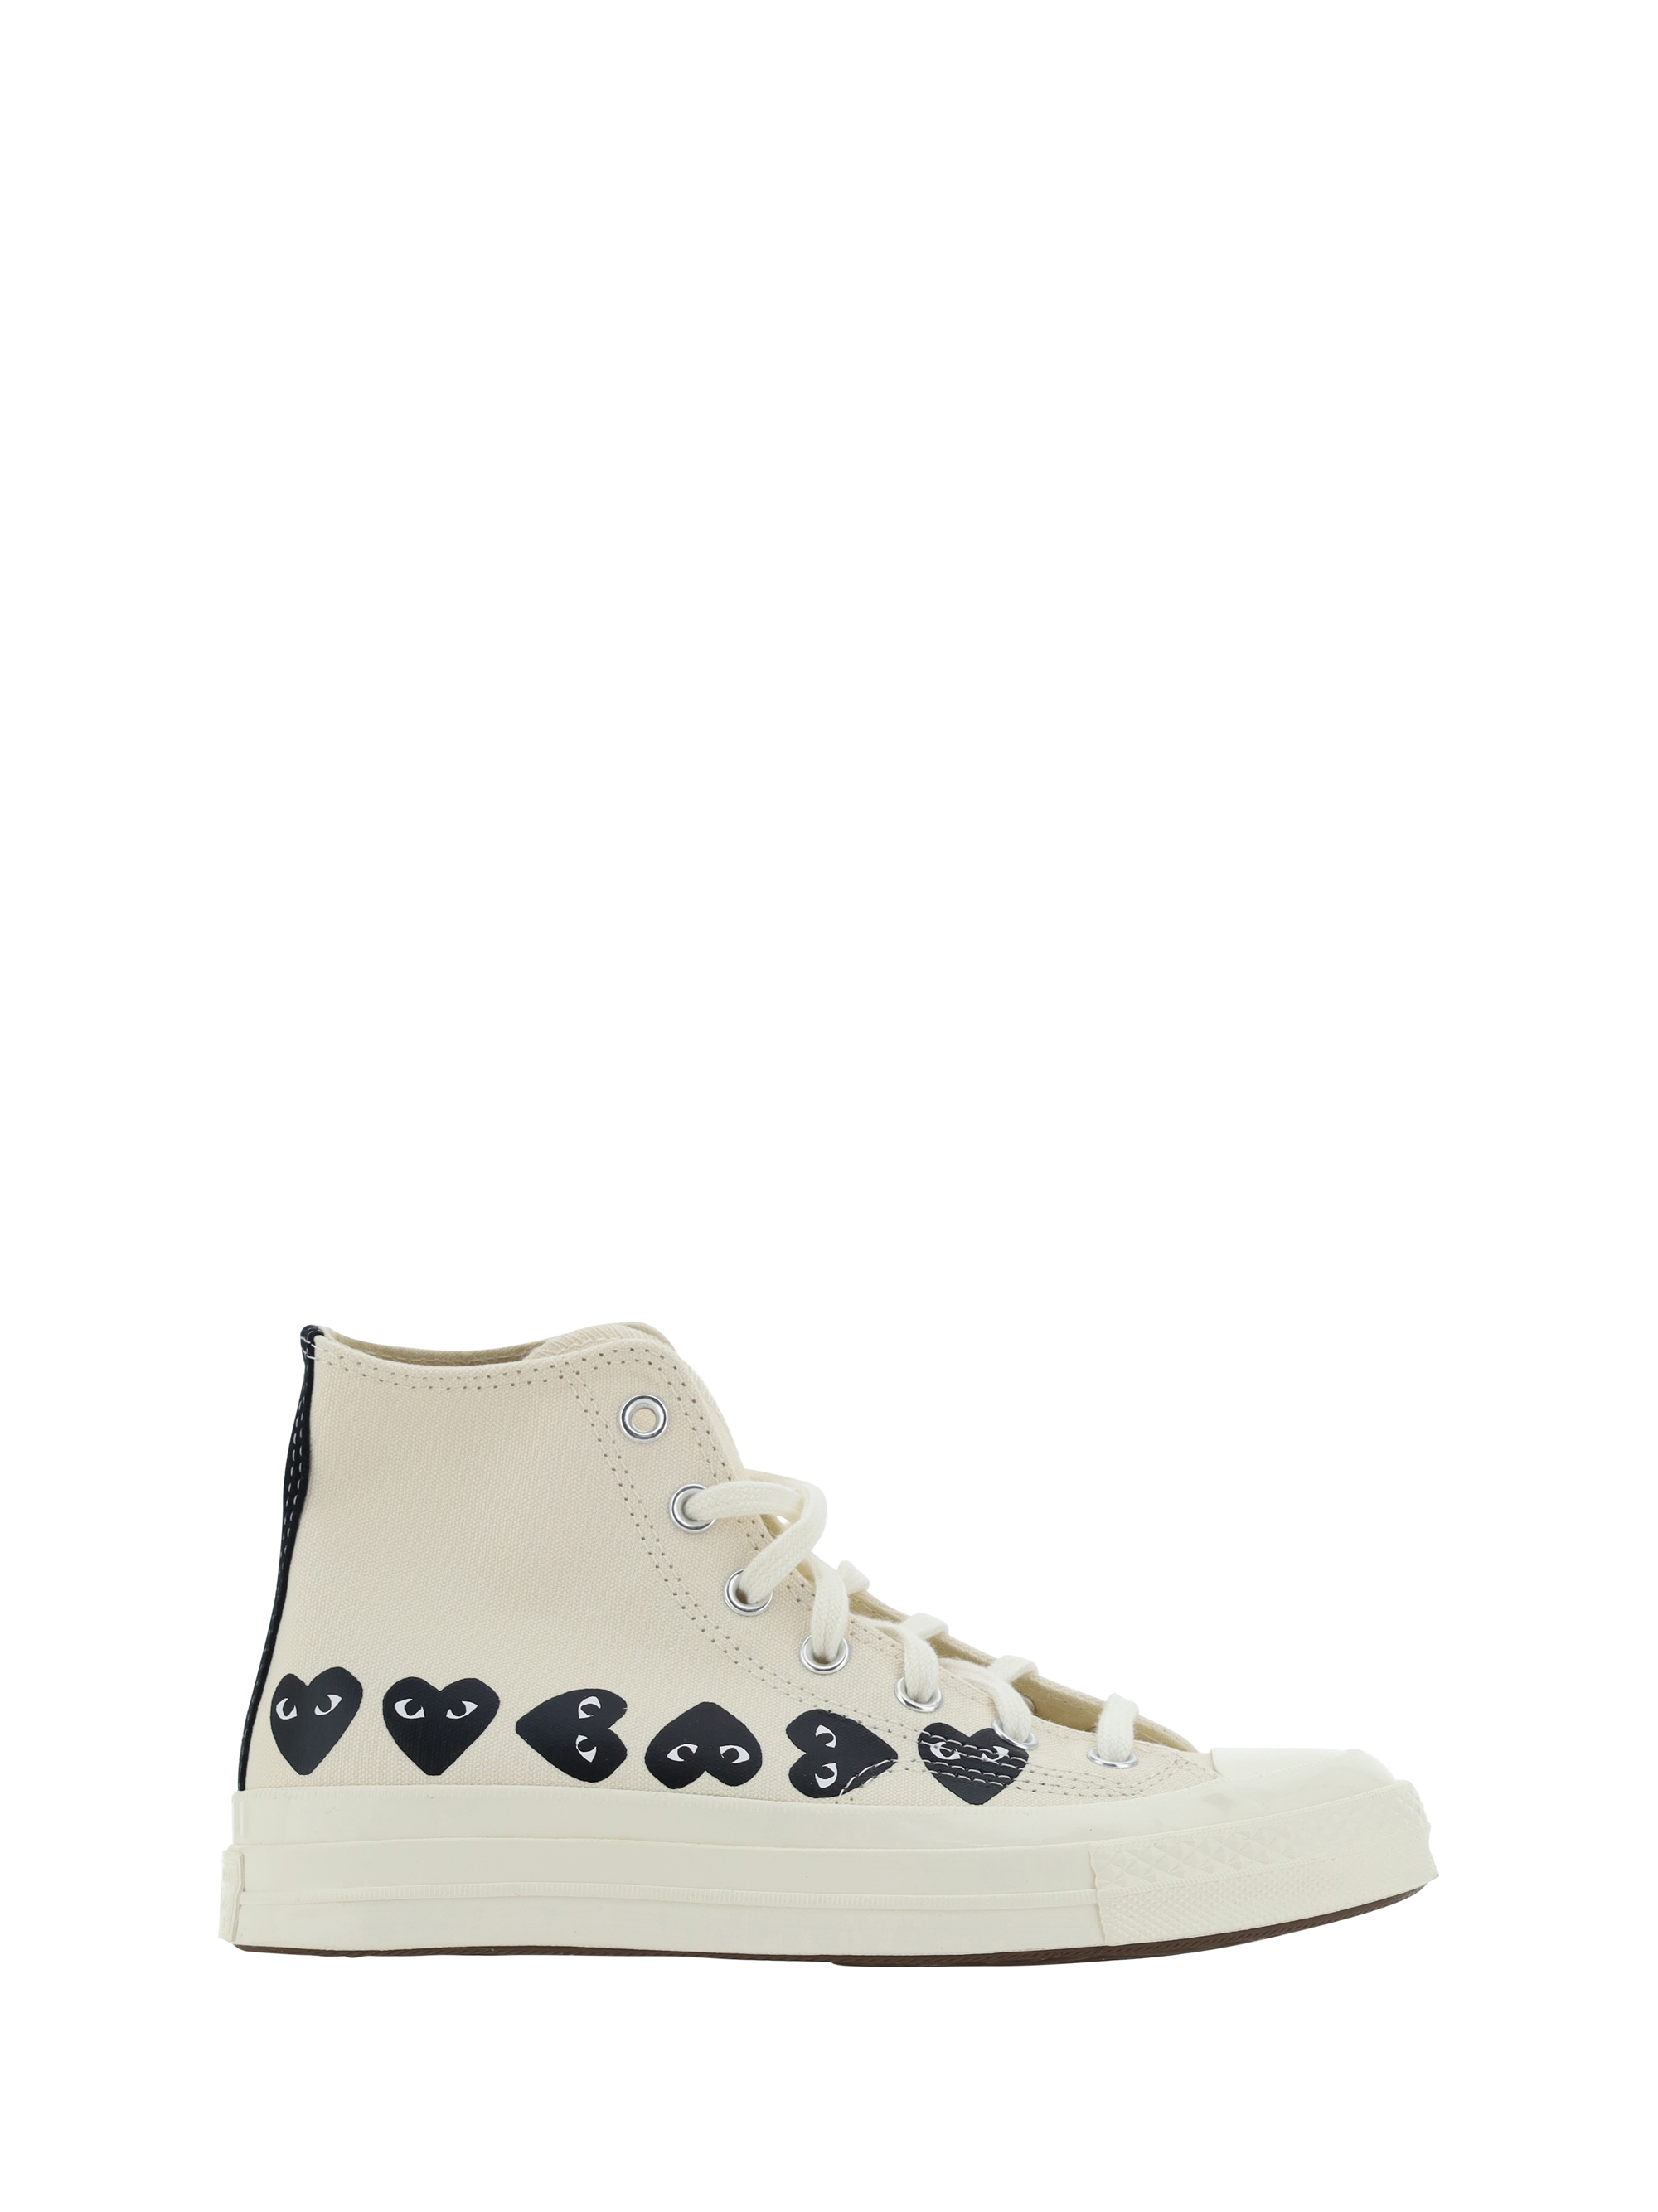 Comme Des Garçons Play X Converse Multi Heart High Trainers In White